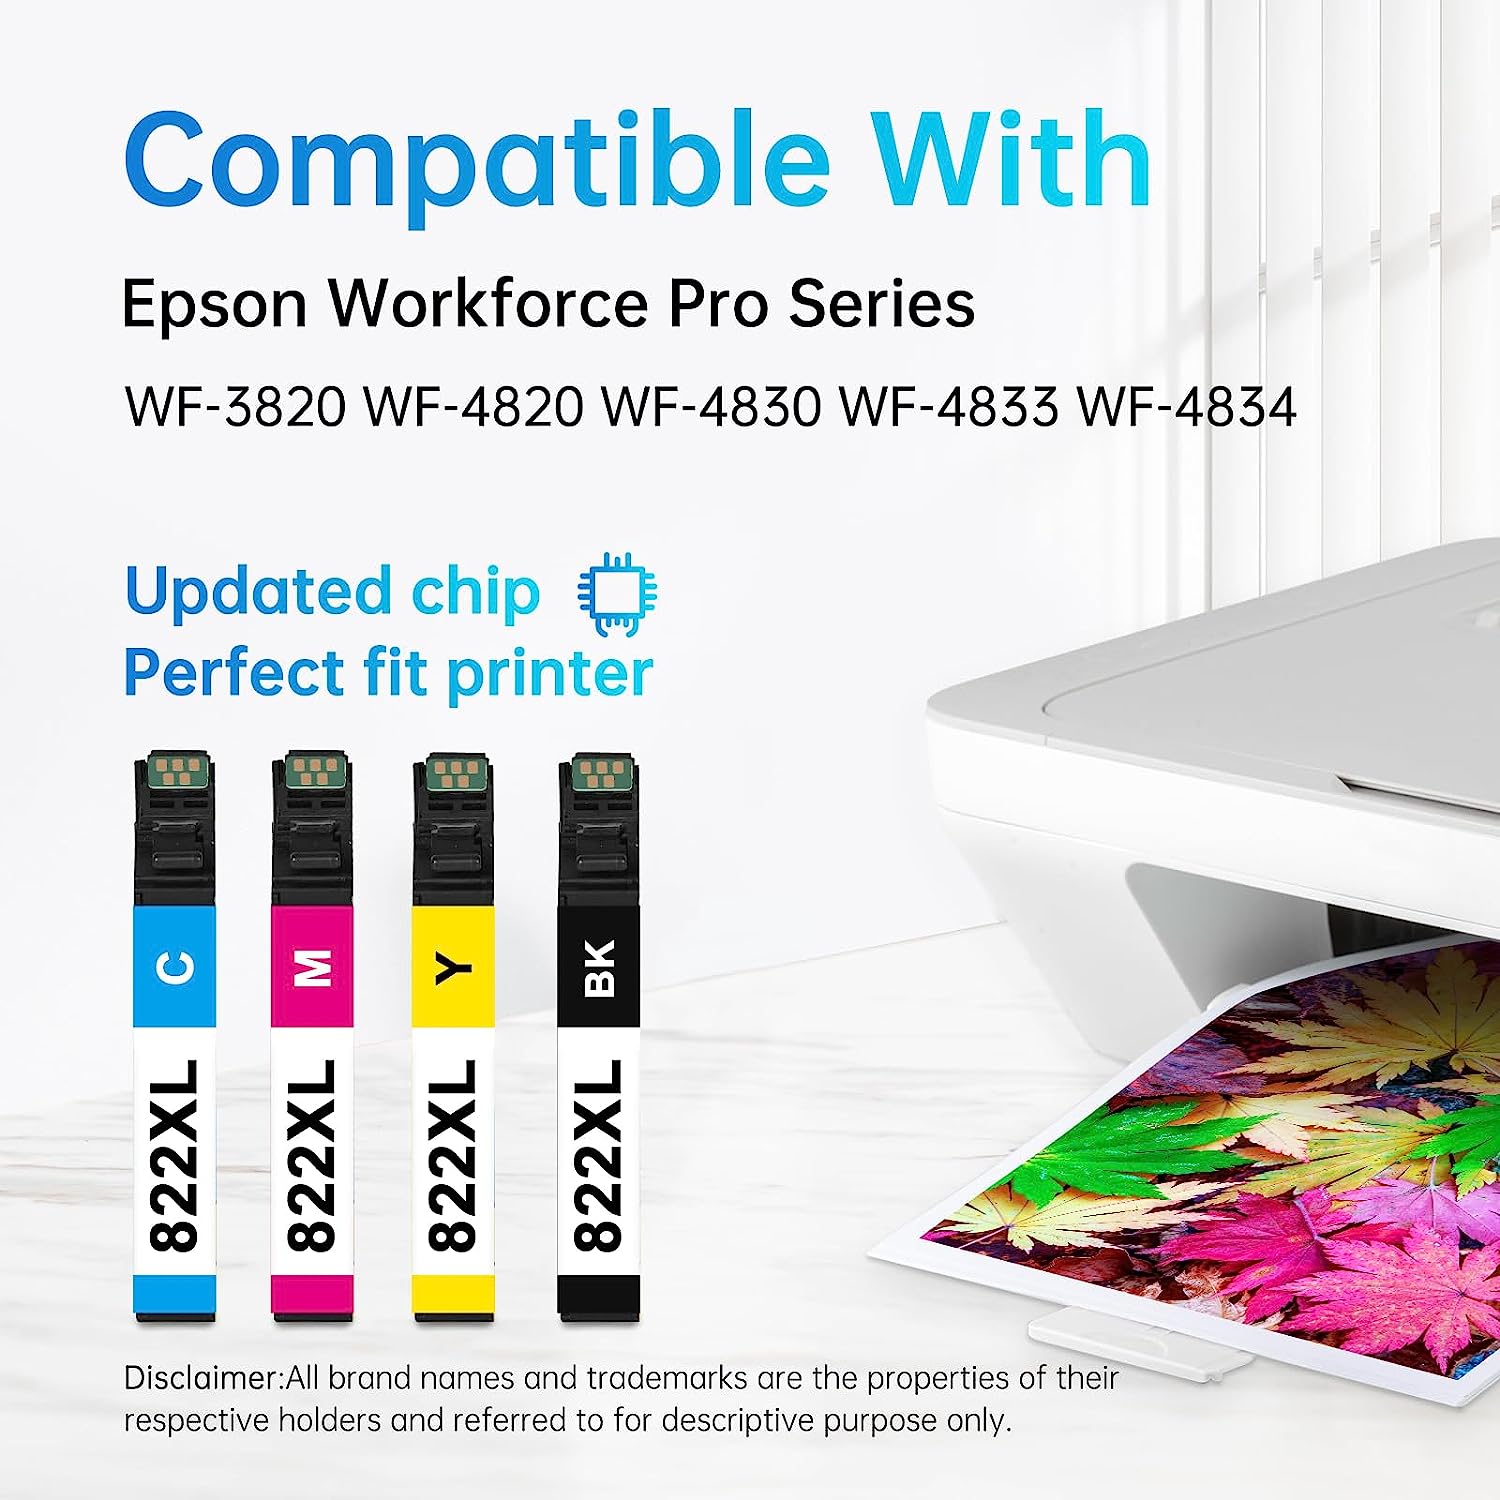 Printer Compatibility for 822XL Ink Cartridges: "Detailed compatibility information for 822XL ink cartridges, suitable for Epson Workforce Pro series printers, with updated chip technology for a perfect printer fit."